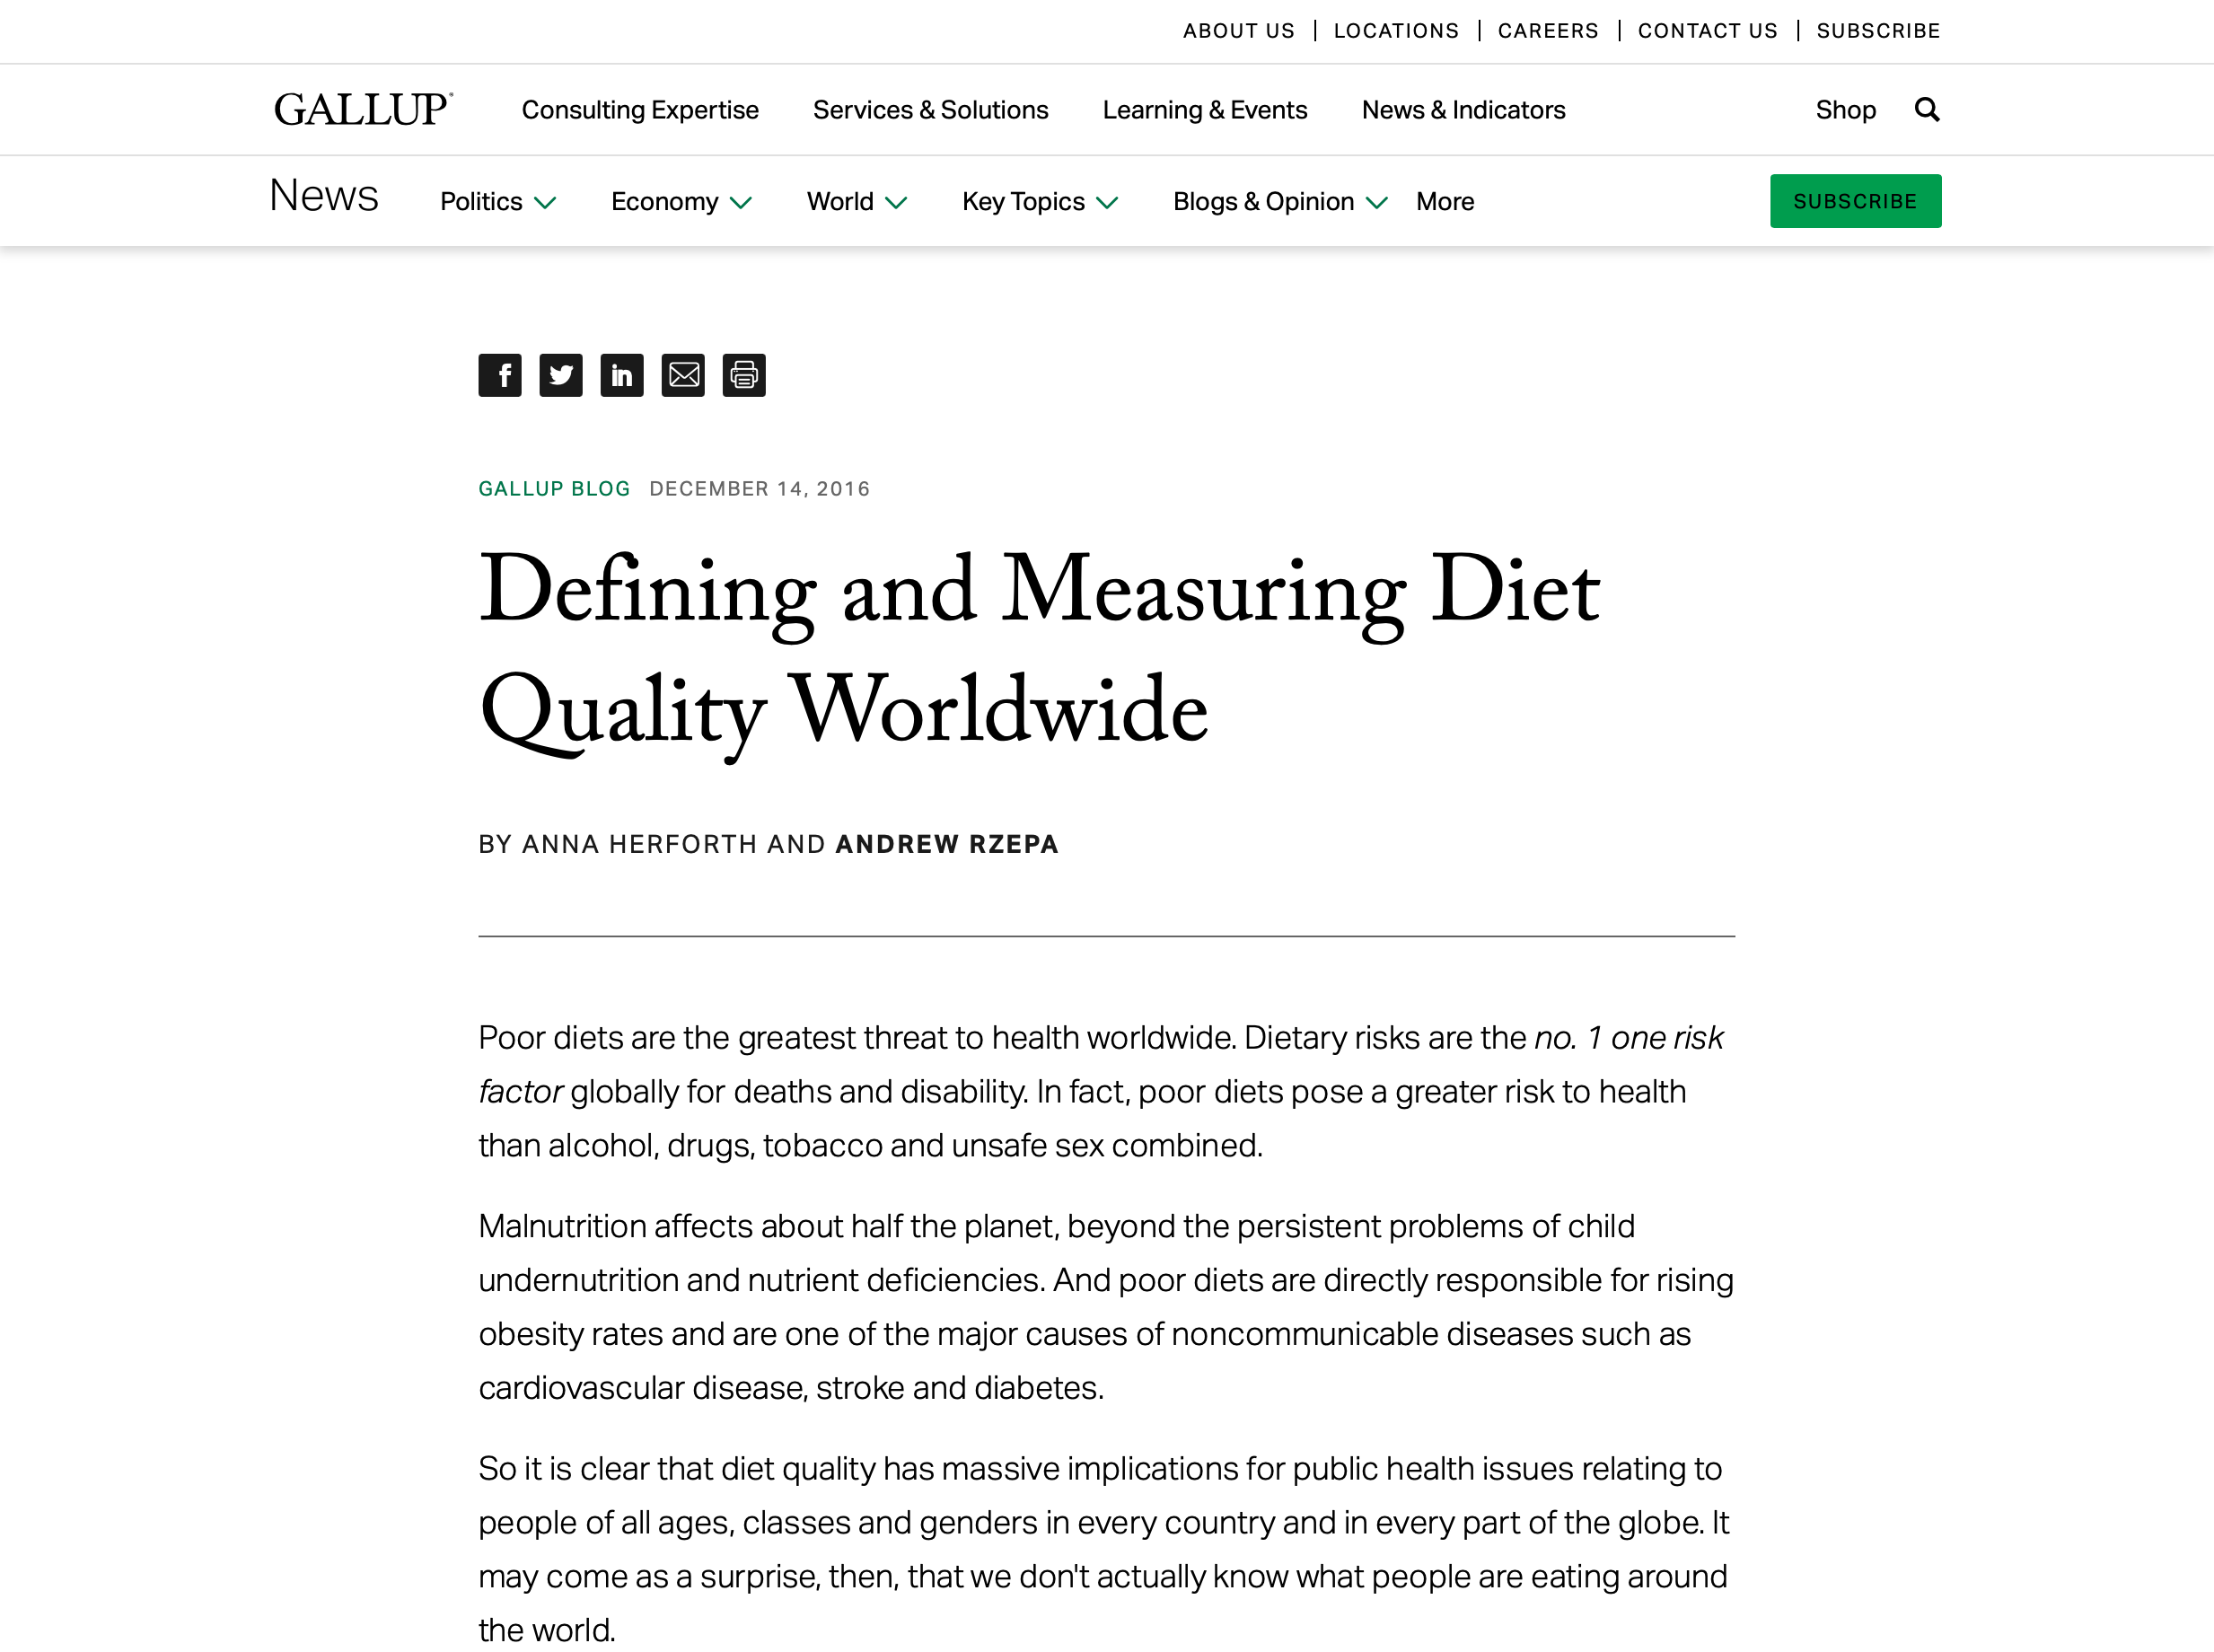 Defining and Measuring Diet Quality Worldwide